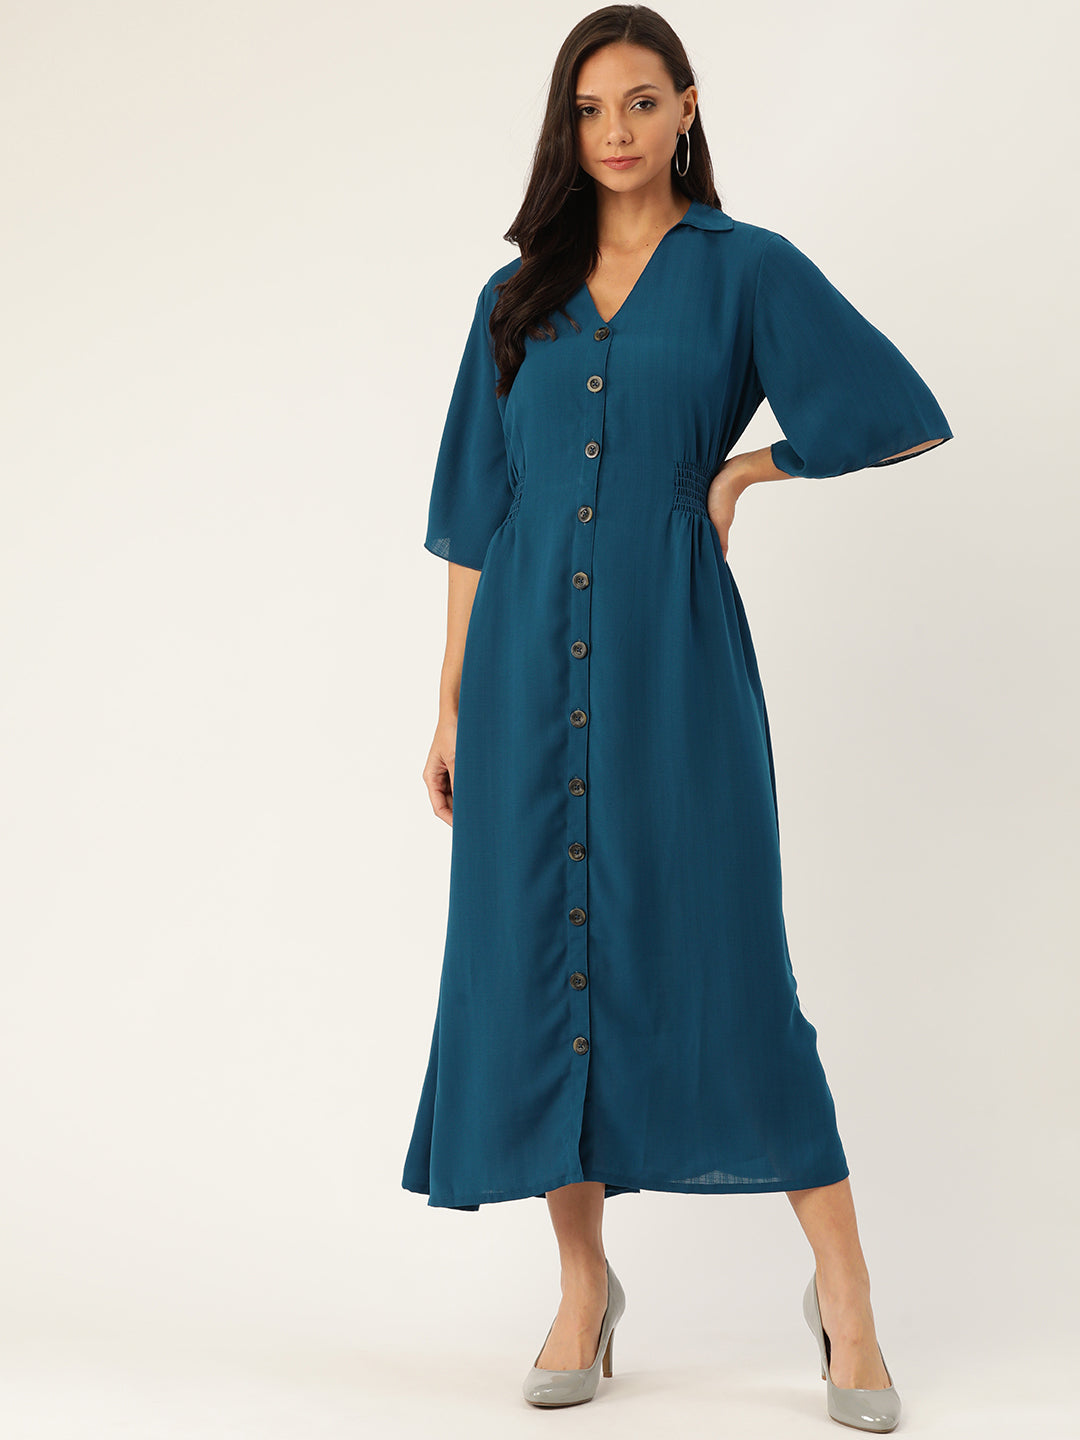 Rue Collection Women Teal Blue Solid Smocked Shirt Dress